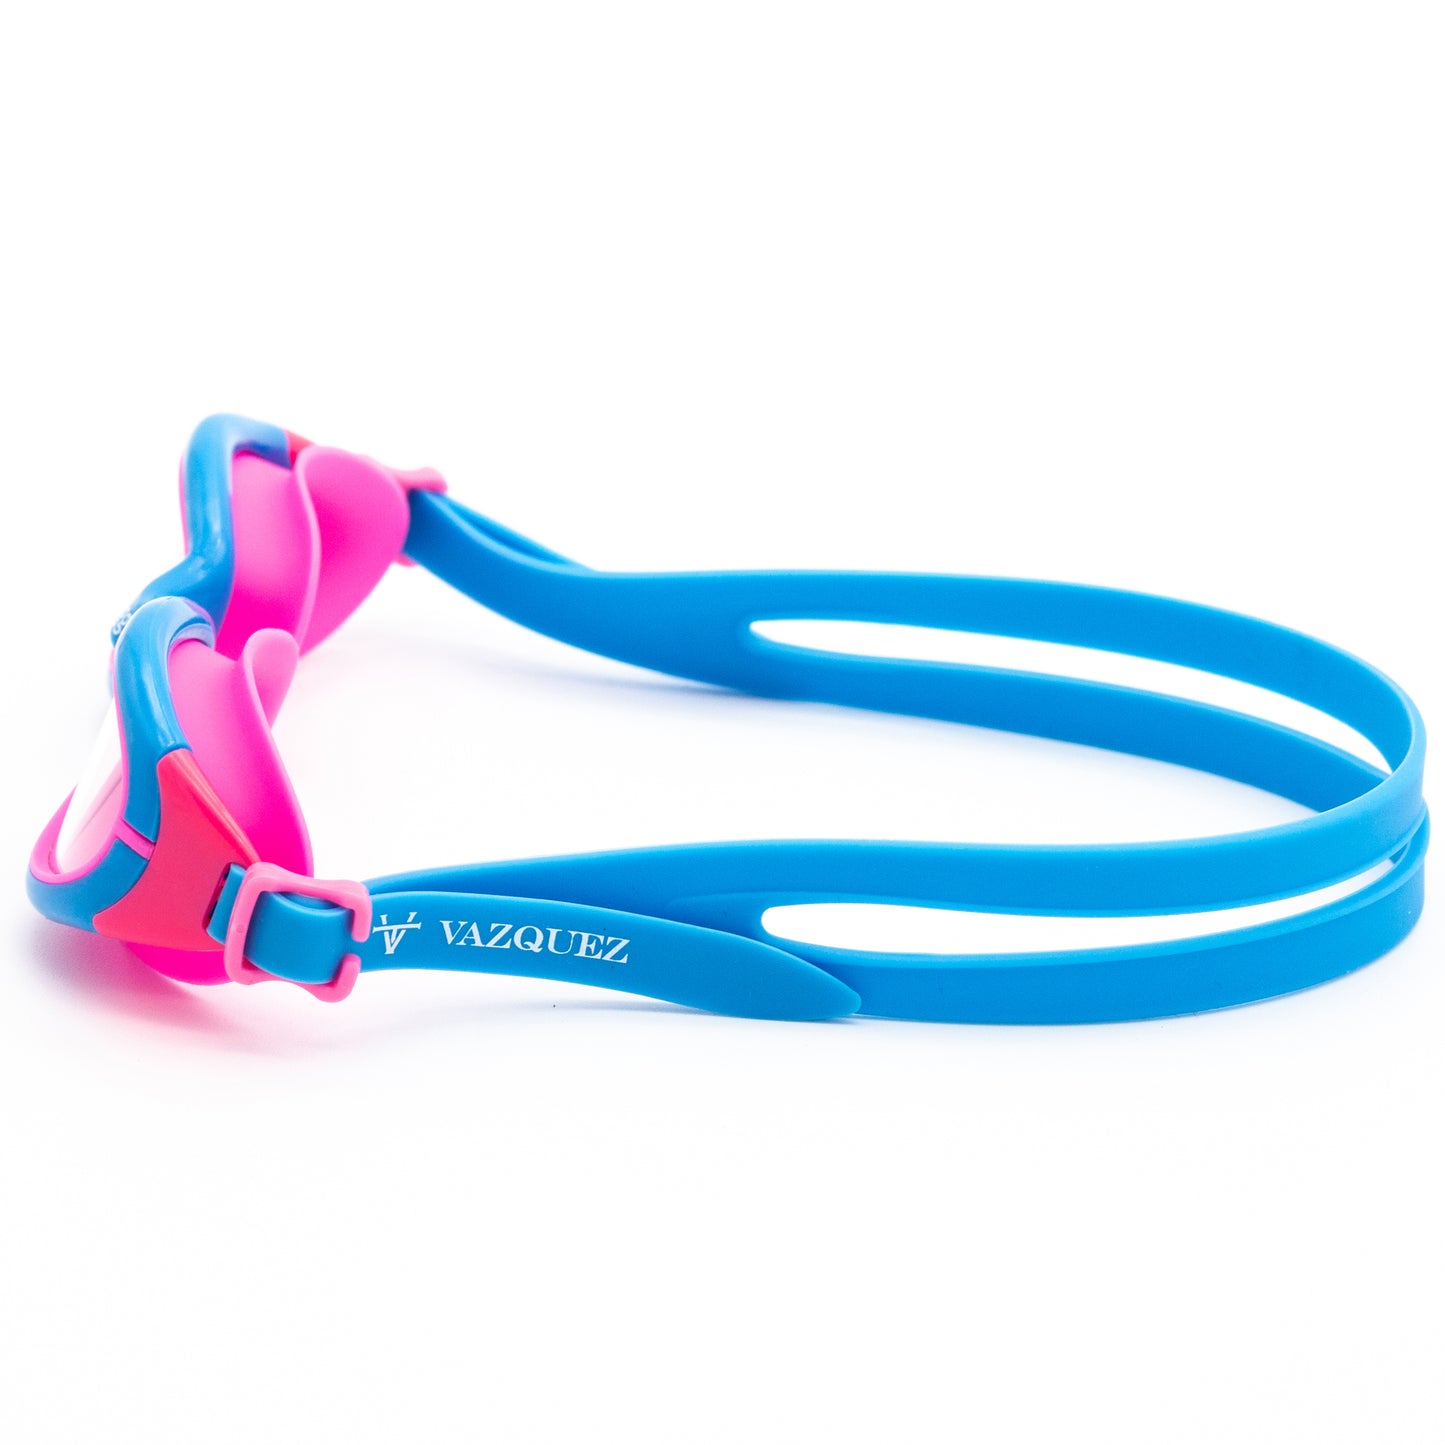 Pink and Blue Vazquez Goggz Kids Swimming Goggles - High-Quality Affordable Swim Goggles